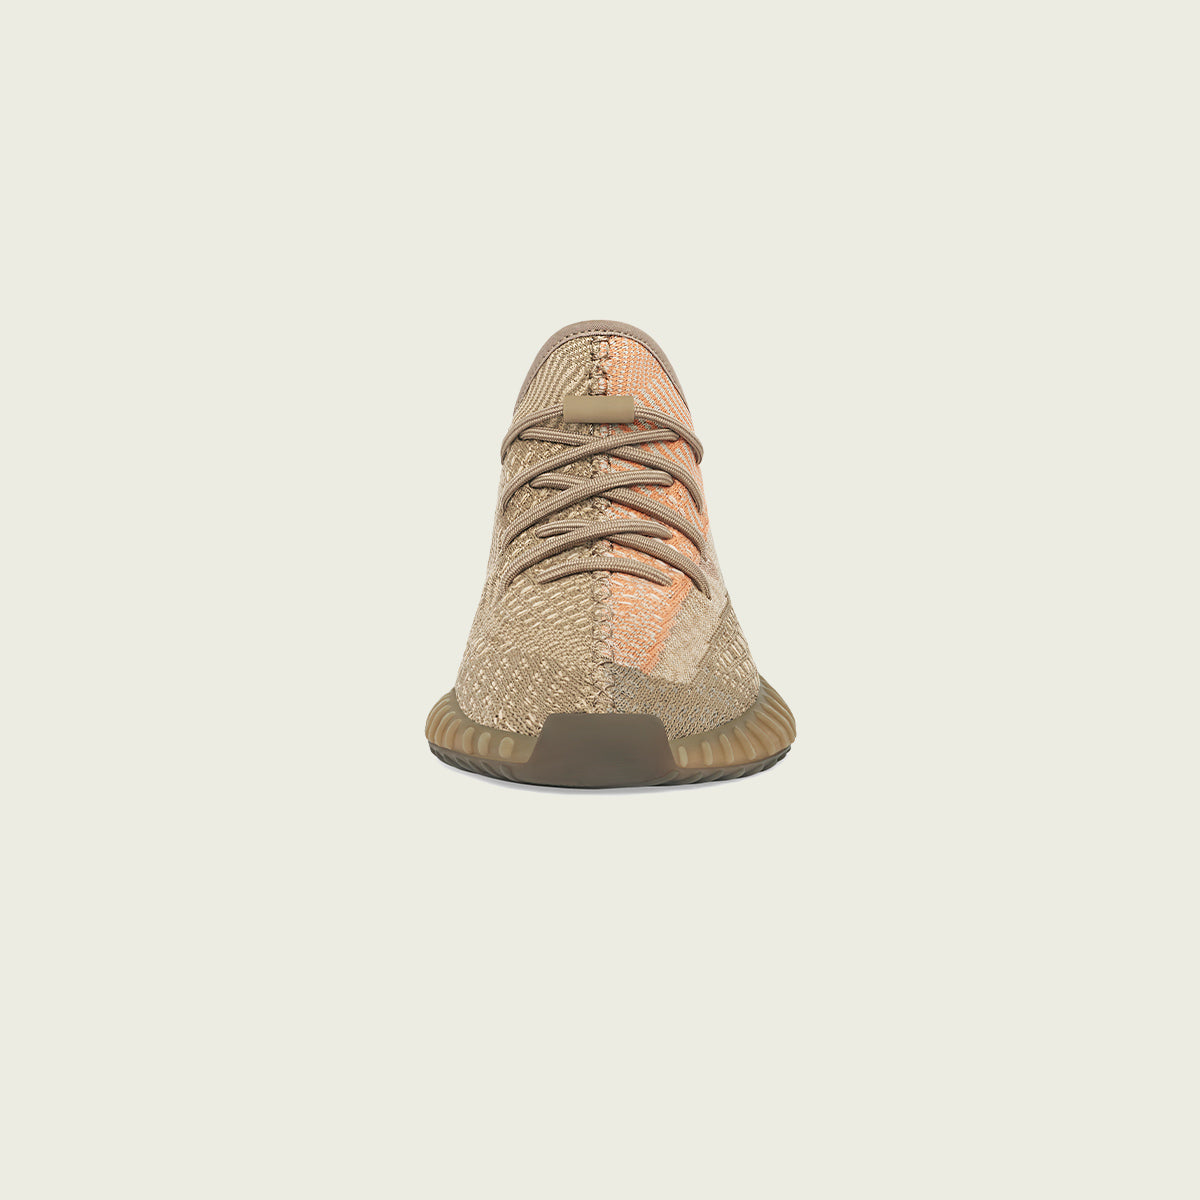 YEEZY BOOST 350 SAND TAUPE